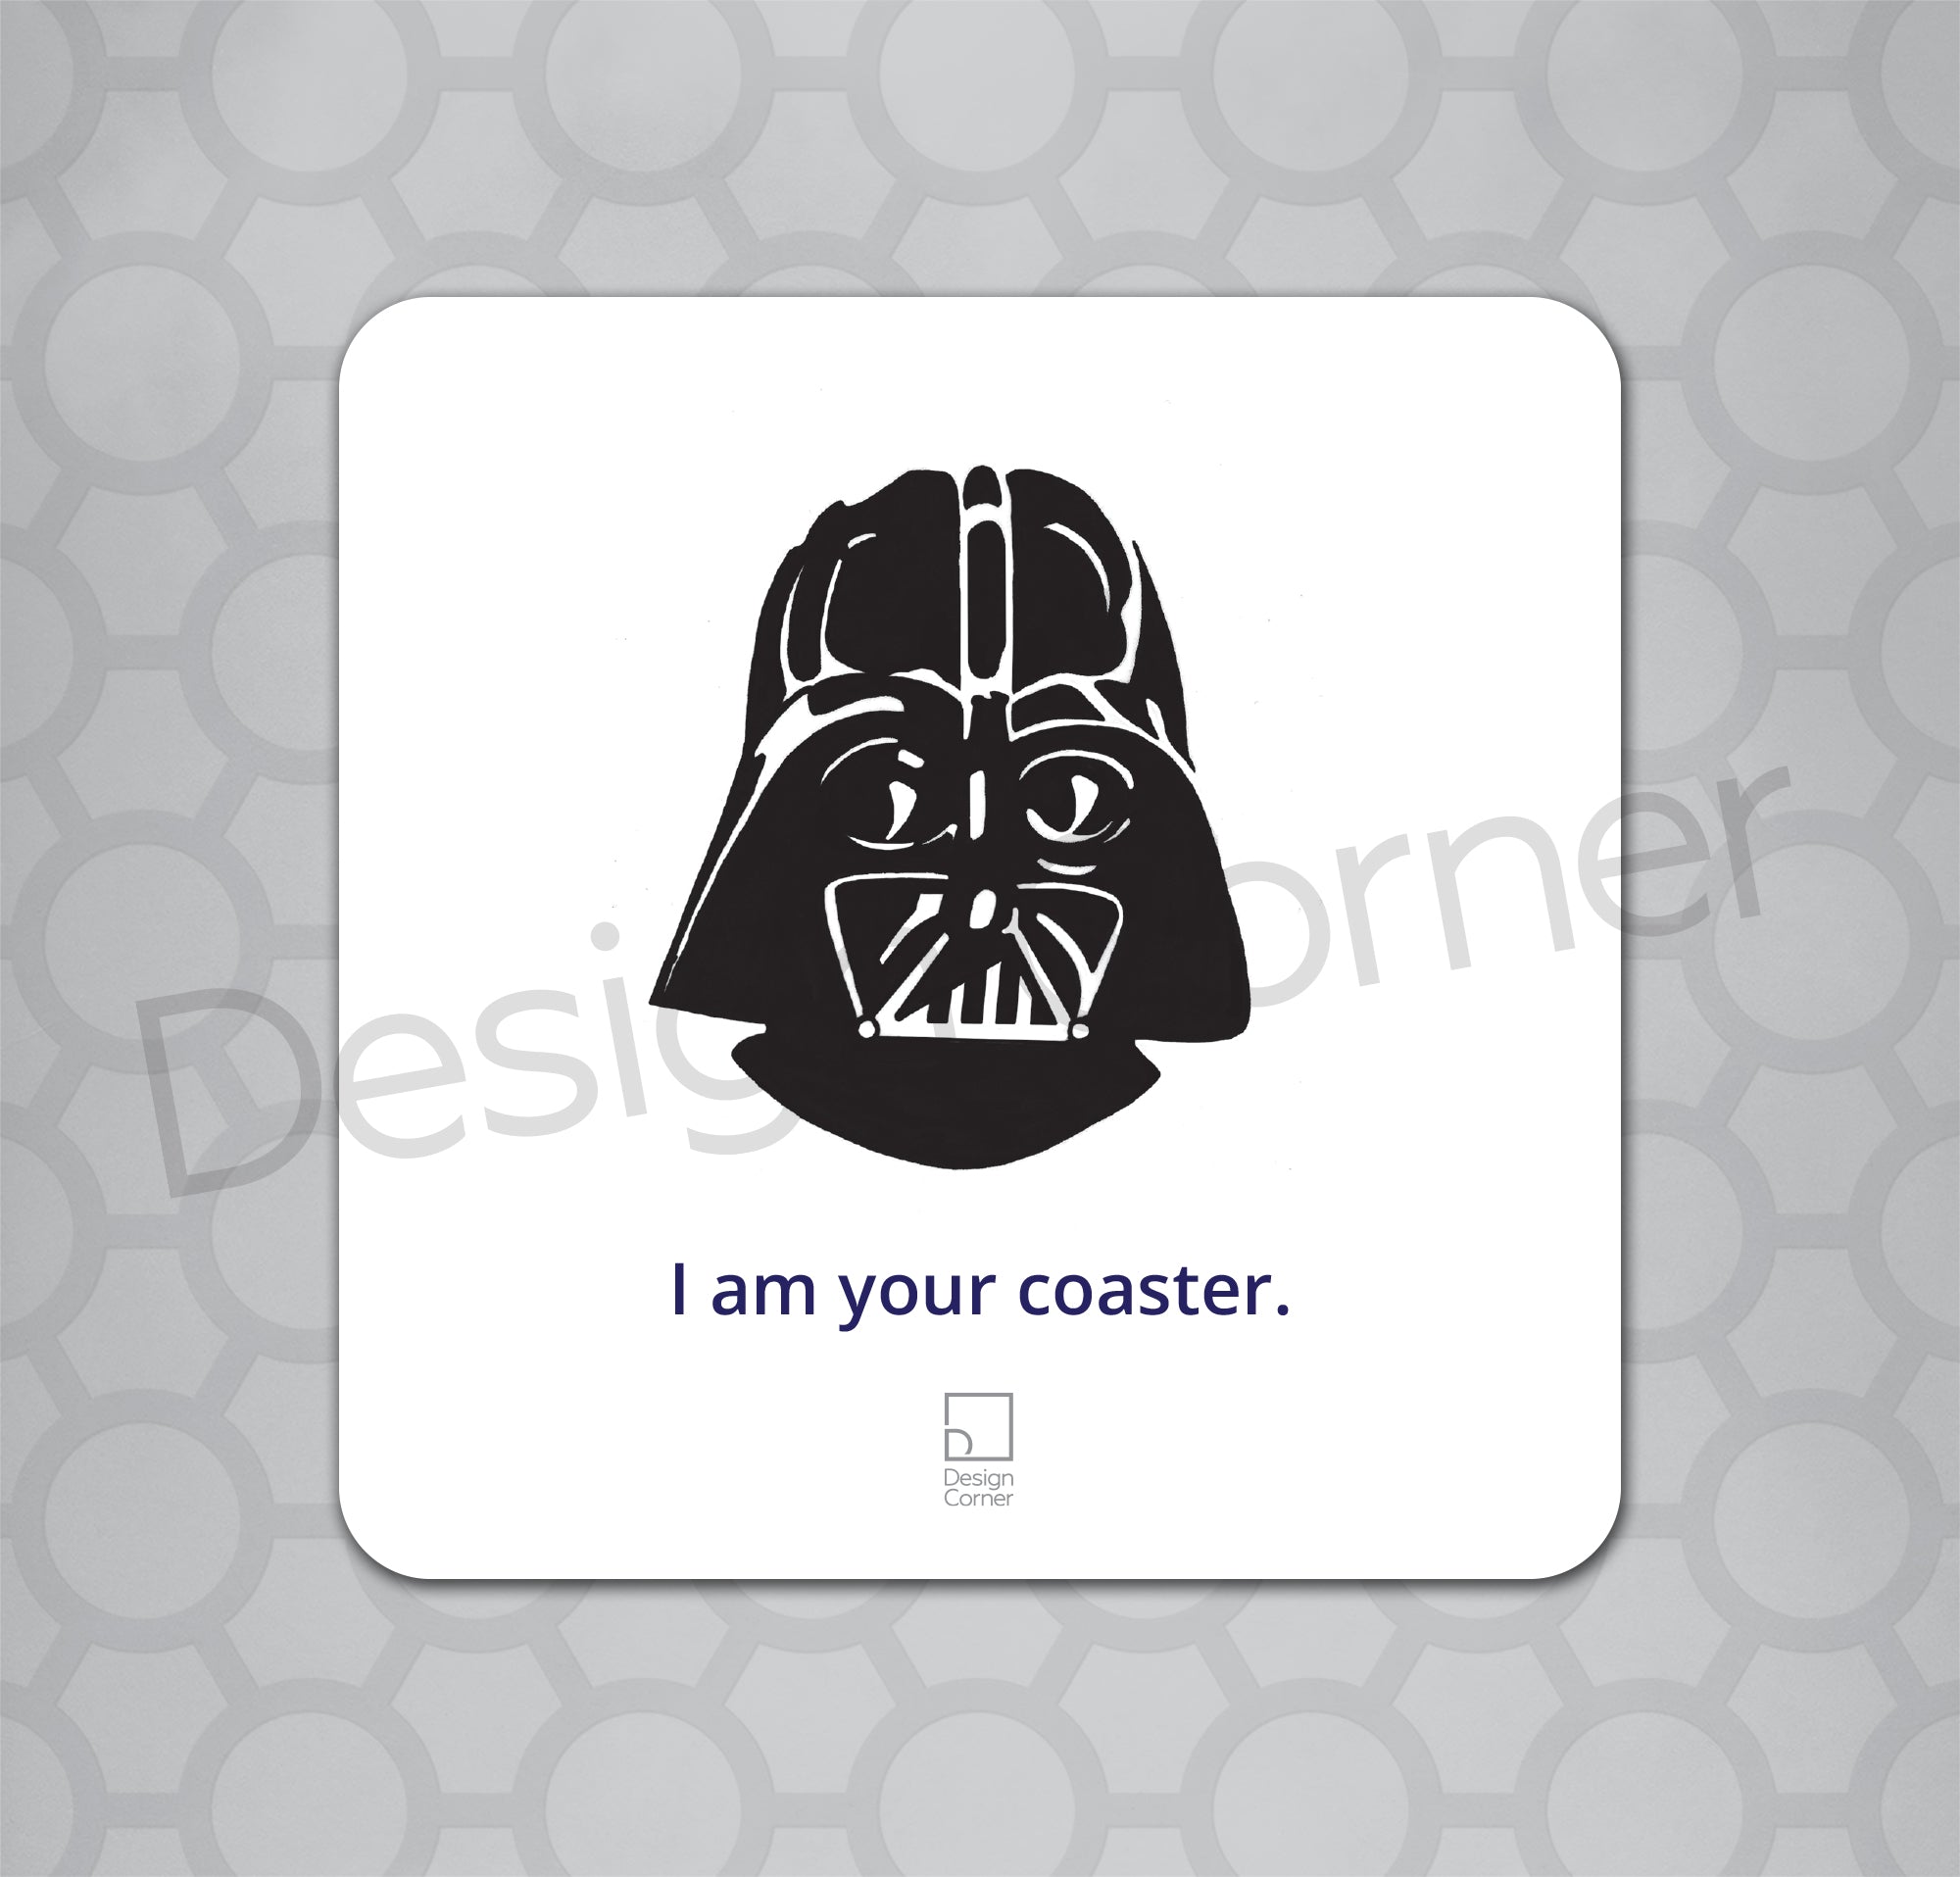 Illustration of Darth Vader on coaster with caption "I am your coaster"